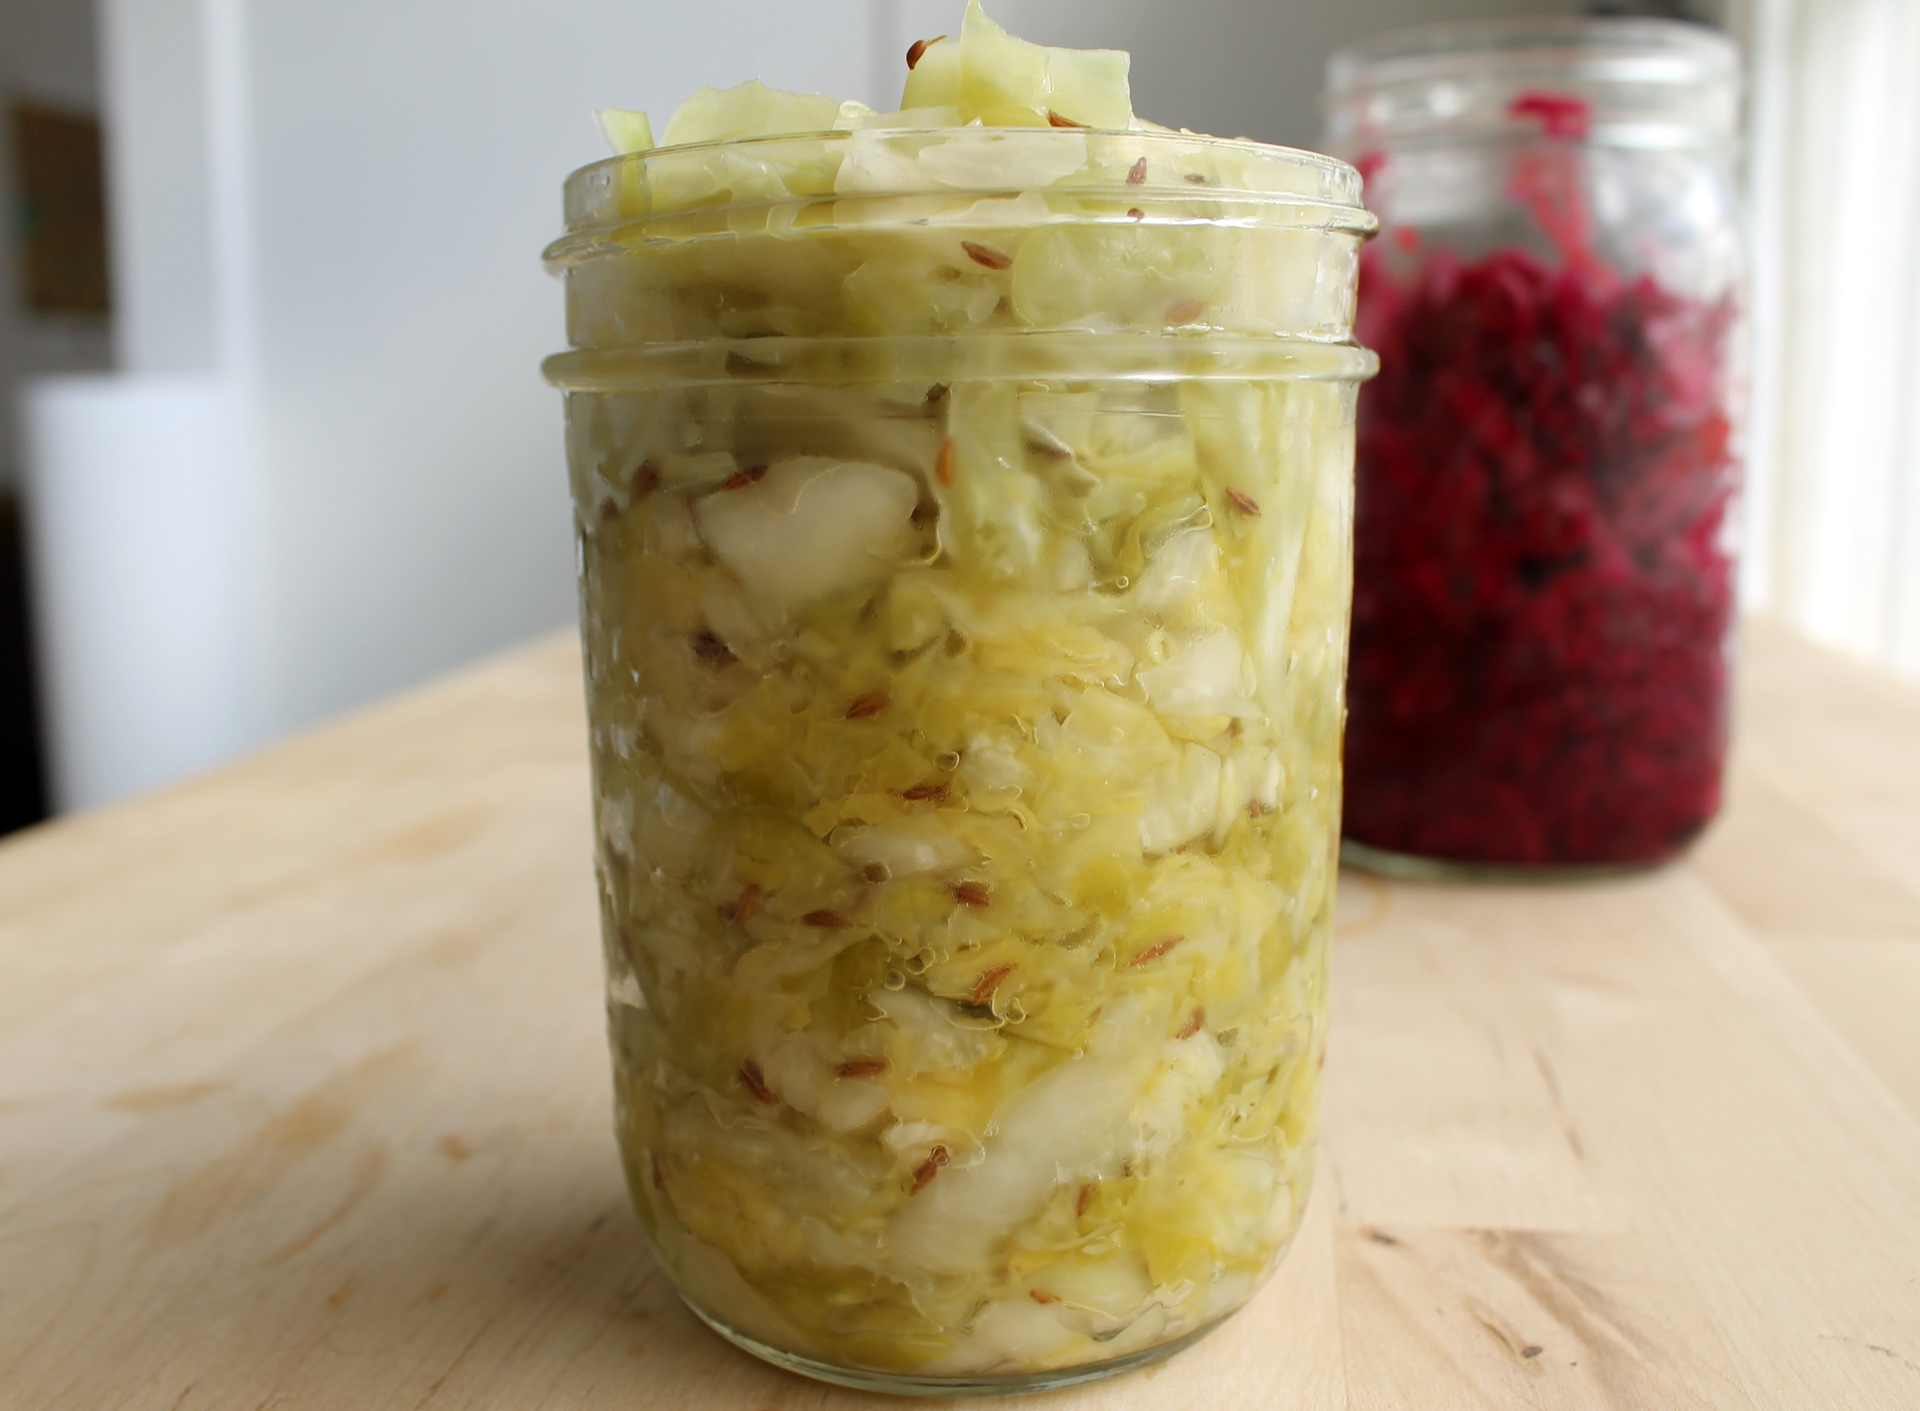 The fully fermented kraut will have visible bubbles inside the jar and will have dulled in color.